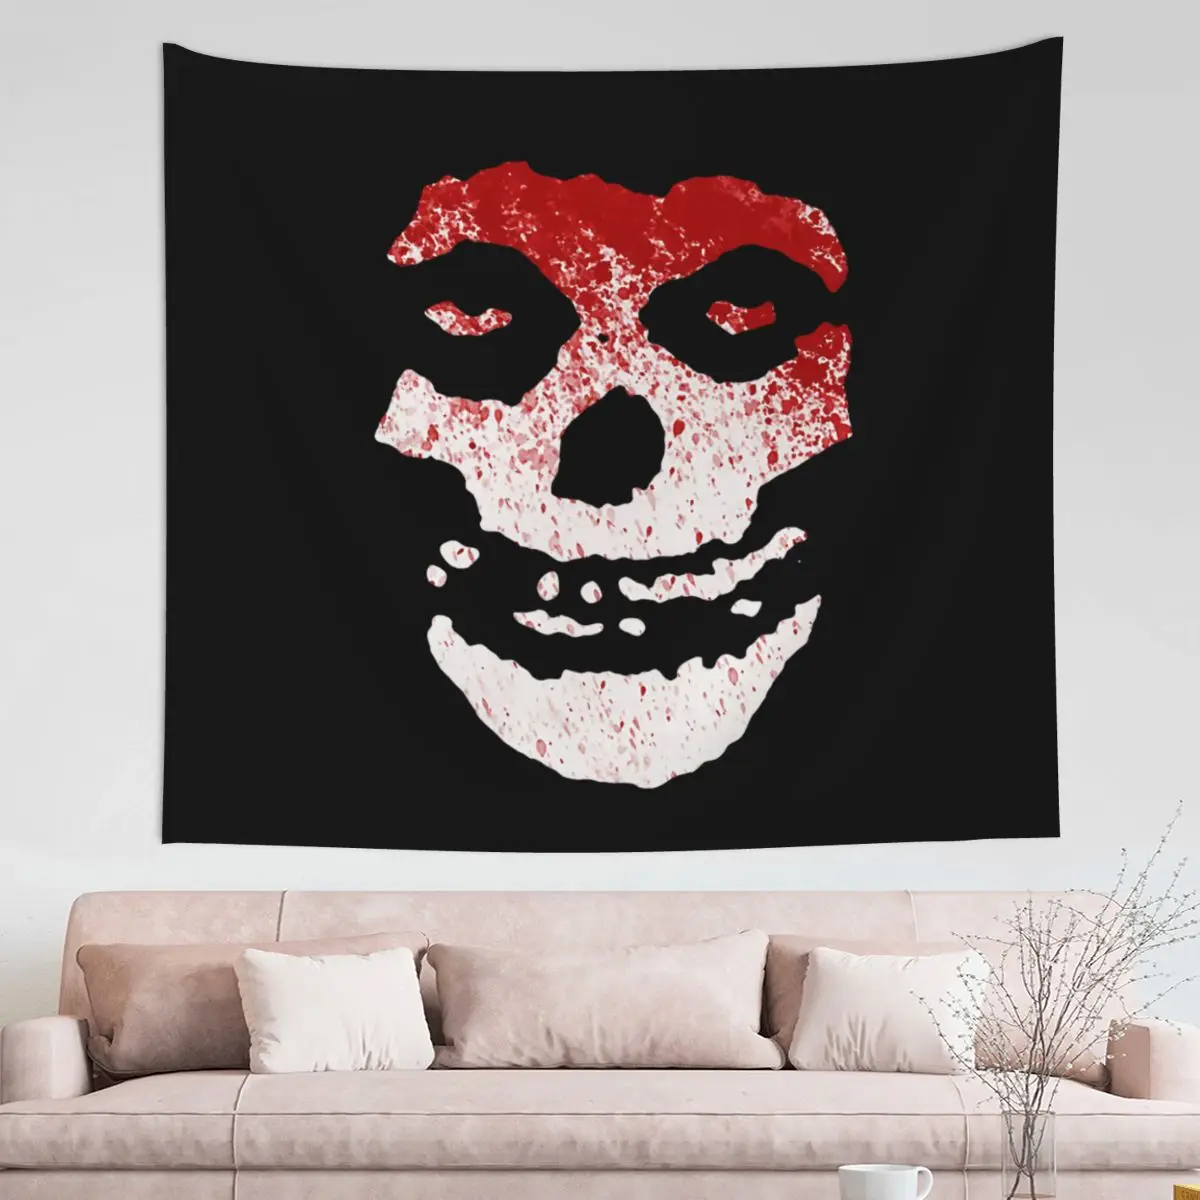 

The Crimson Ghost Skull Blood Misfits Tapestry Wall Hanging Printed Polyester Tapestries Art Blanket Room Decor Tapiz